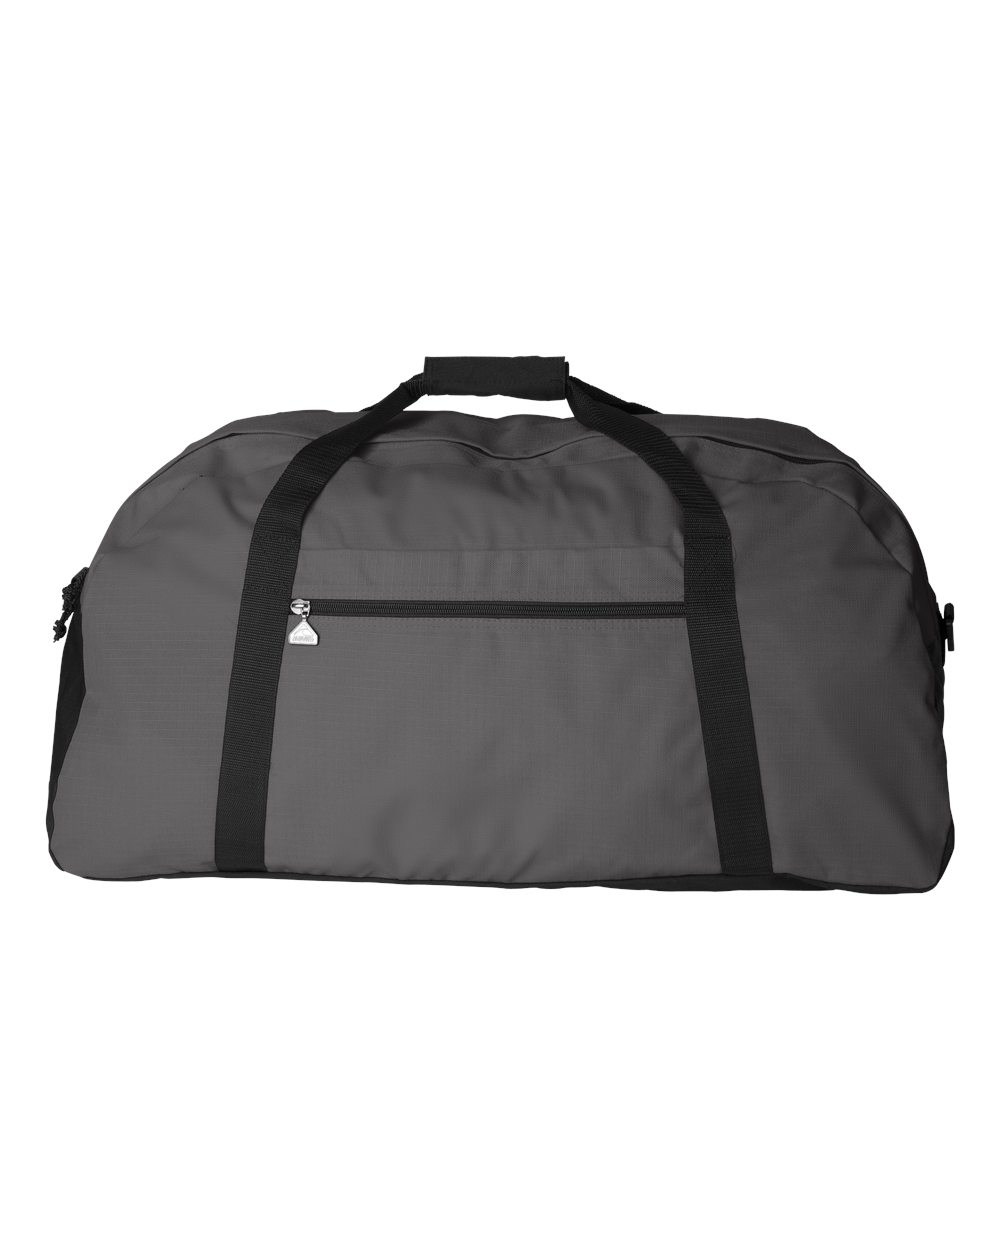 Augusta 1703A Large Ripstop Duffel Bag - Graphite & Black- ALL - image 1 of 5